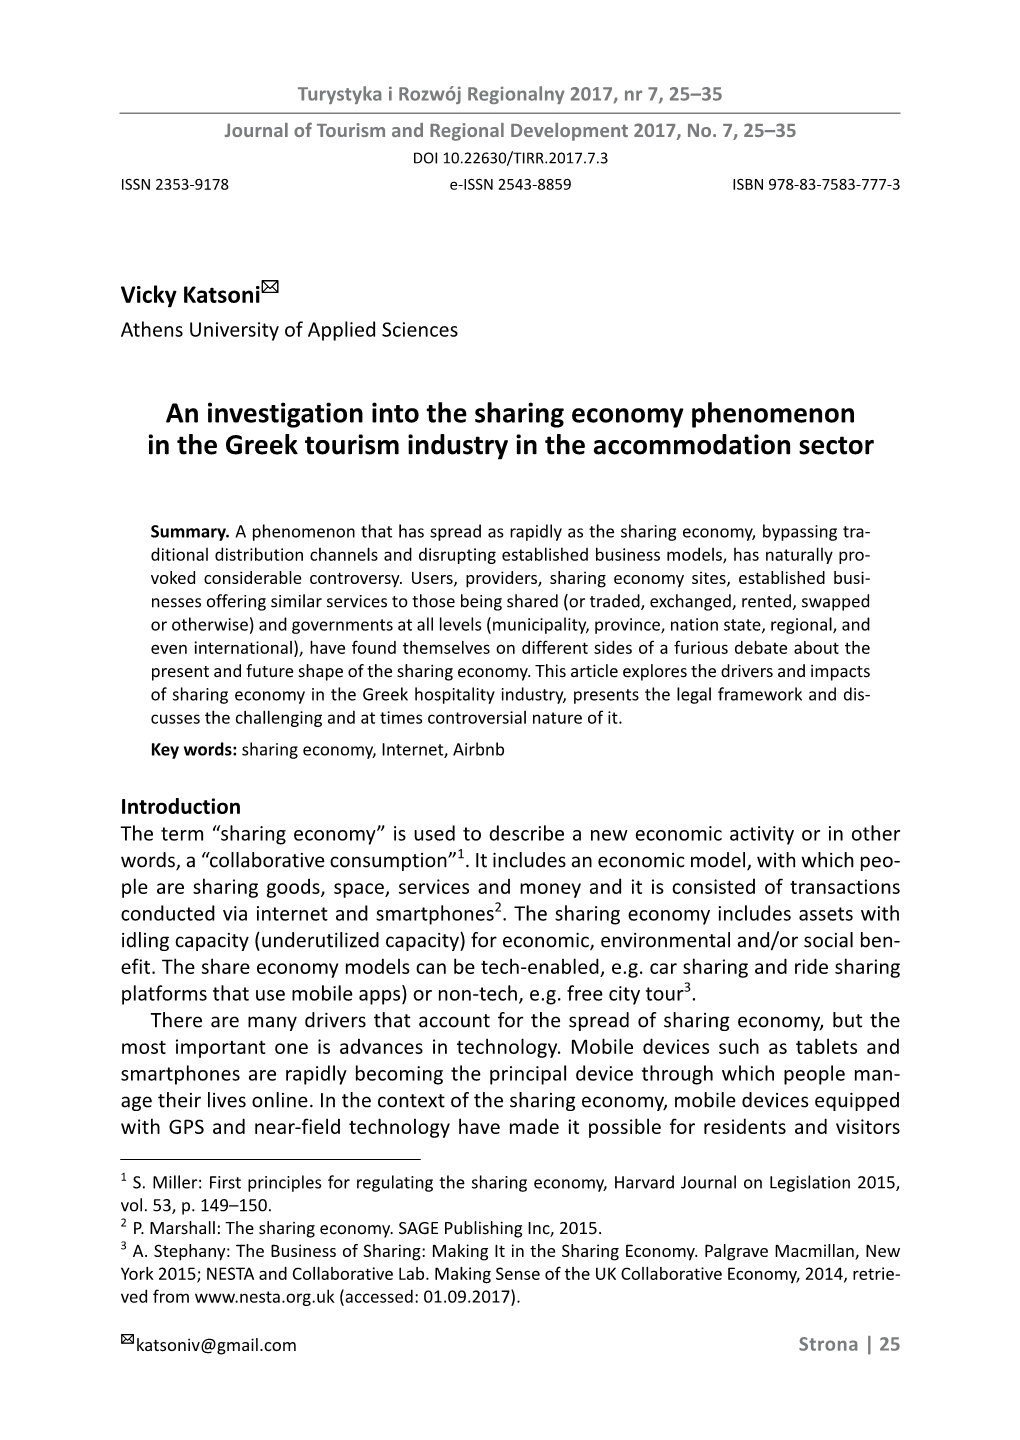 An Investigation Into the Sharing Economy Phenomenon in the Greek Tourism Industry in the Accommodation Sector